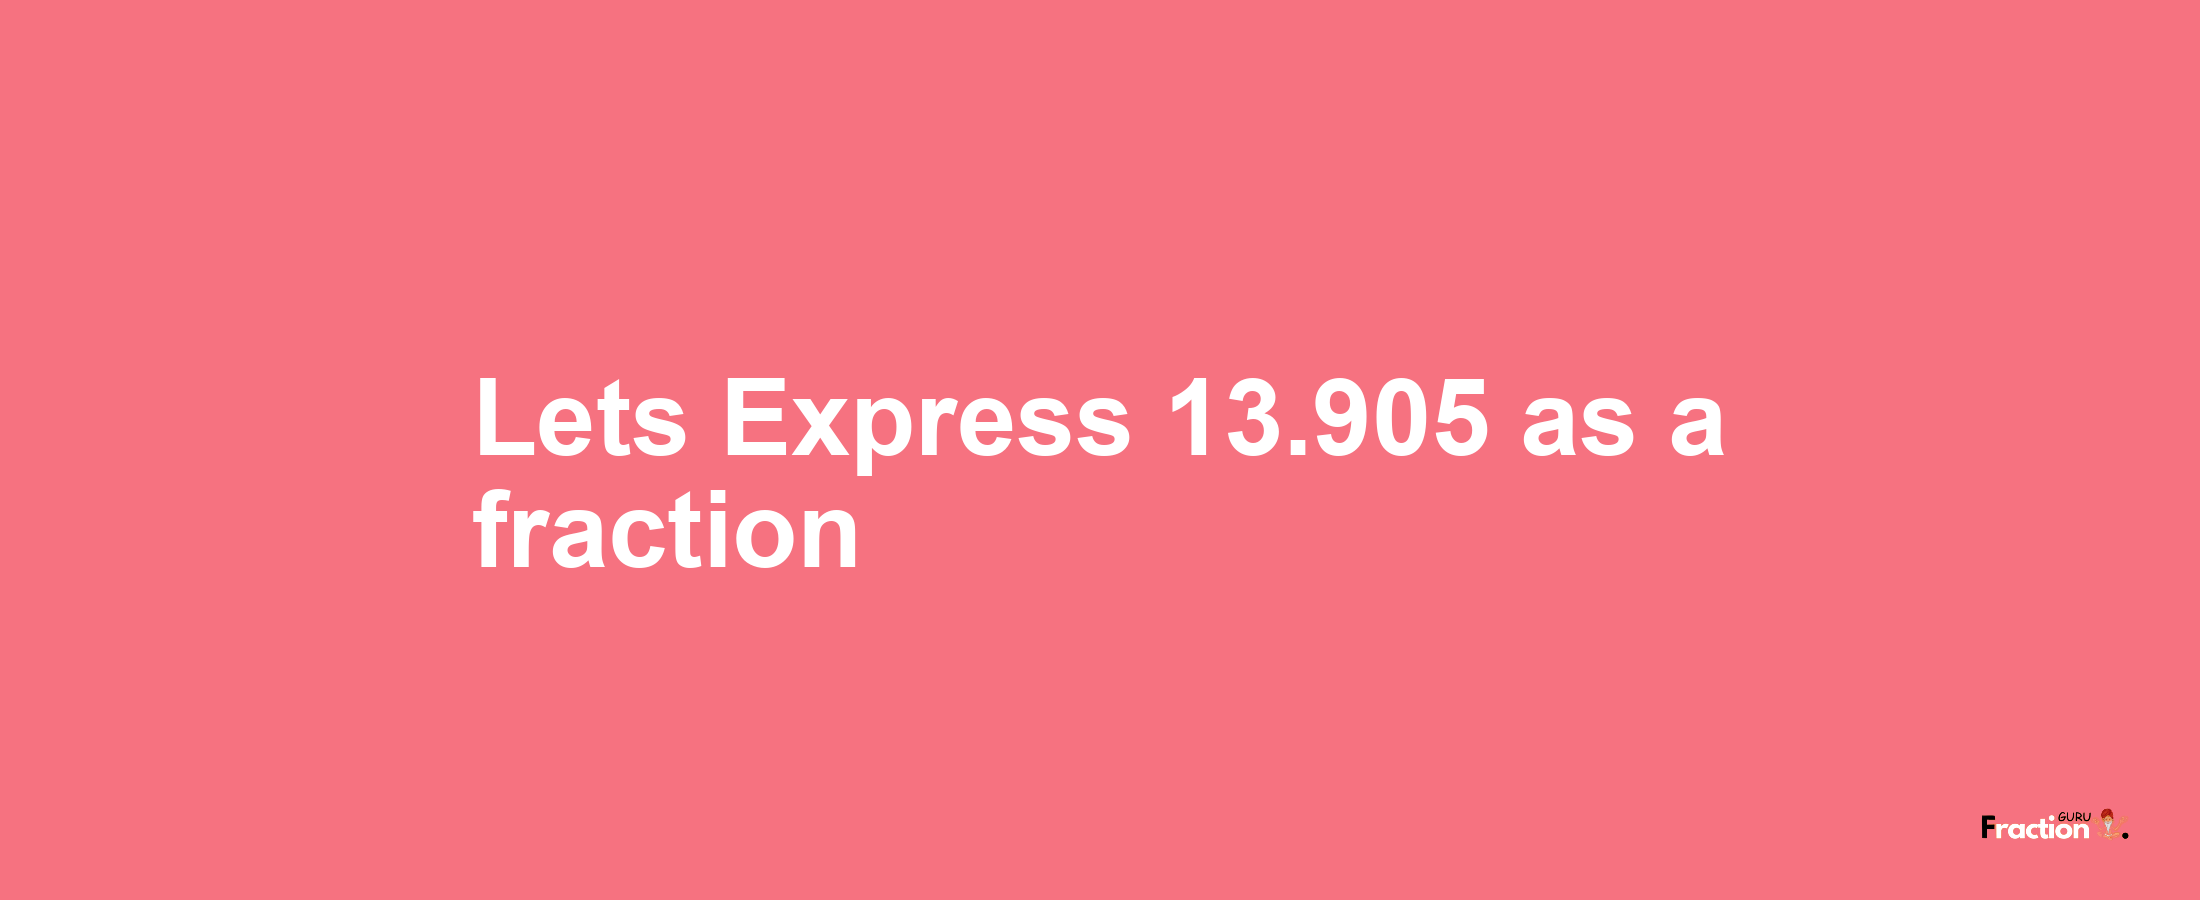 Lets Express 13.905 as afraction